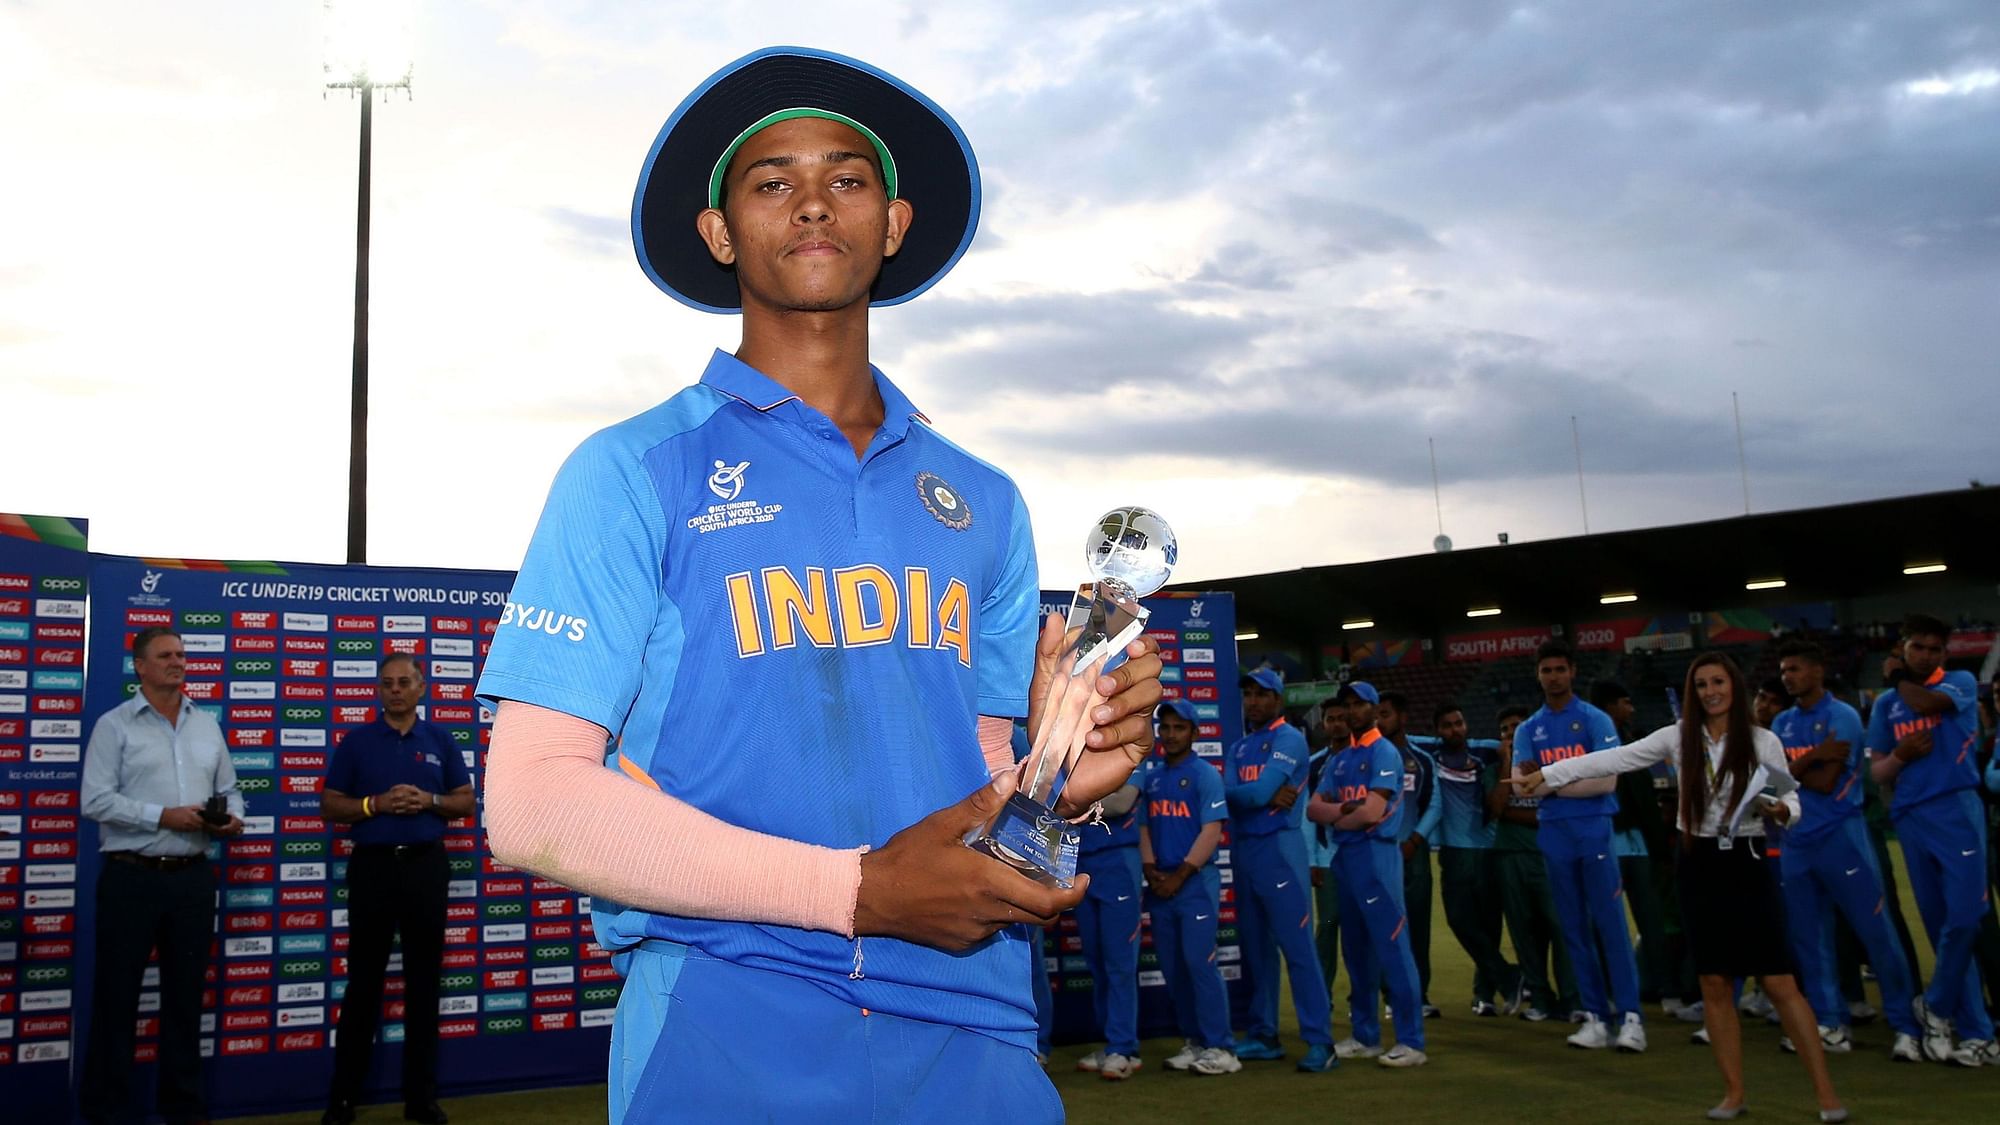 Yashasvi jaiswal was adjudged Player of the Tournament for his stellar run in the ICC U-19 World Cup.